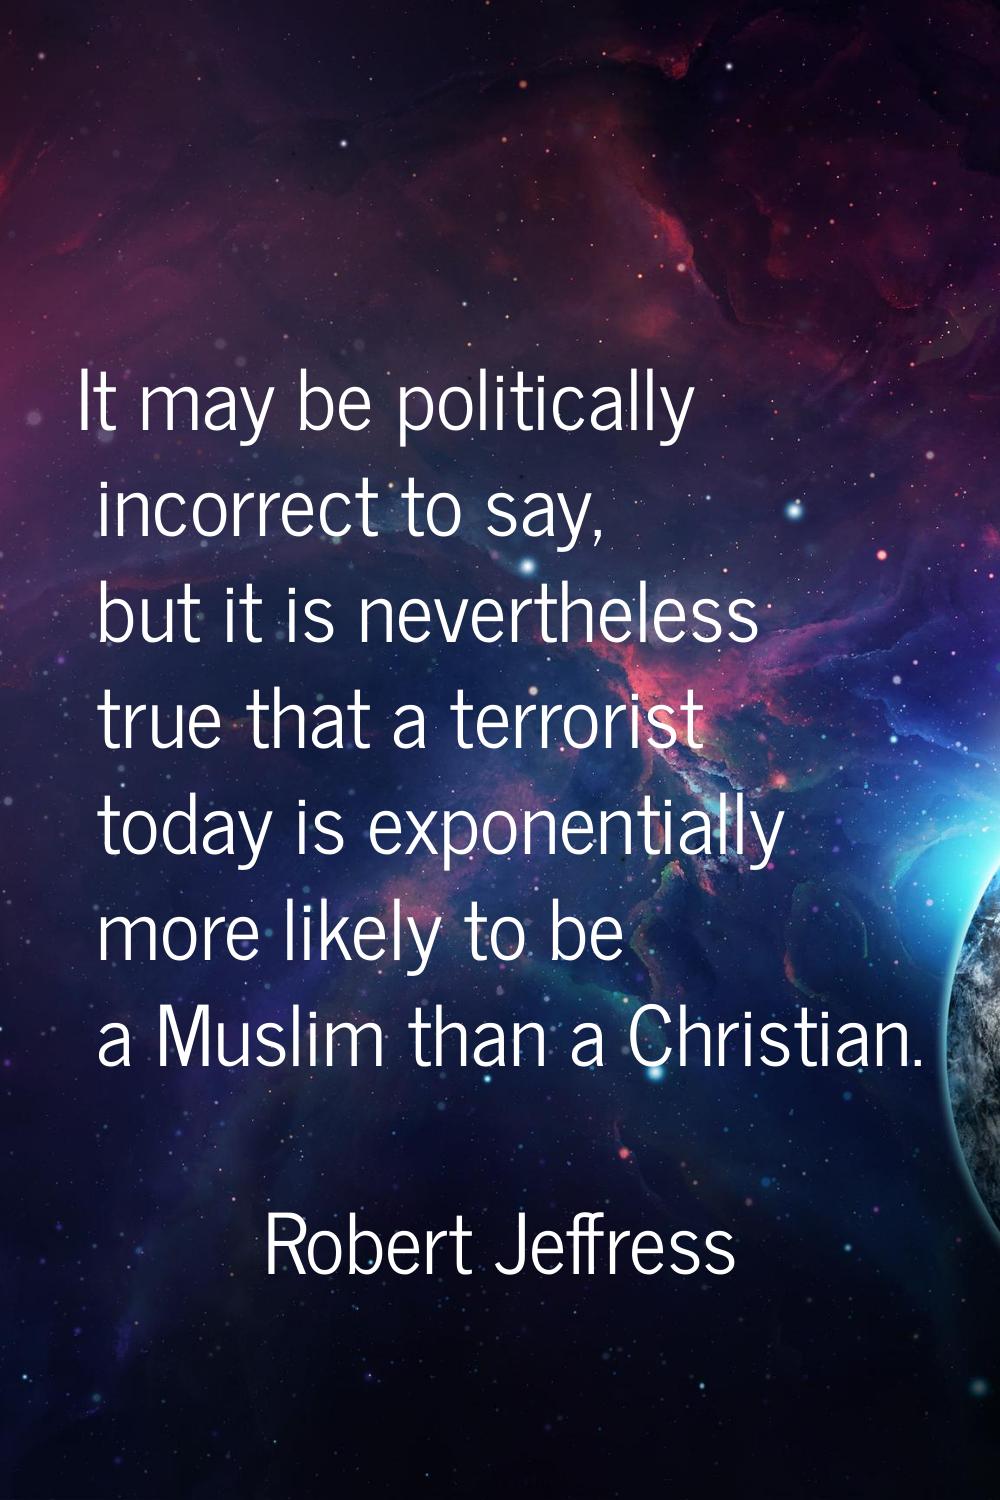 It may be politically incorrect to say, but it is nevertheless true that a terrorist today is expon